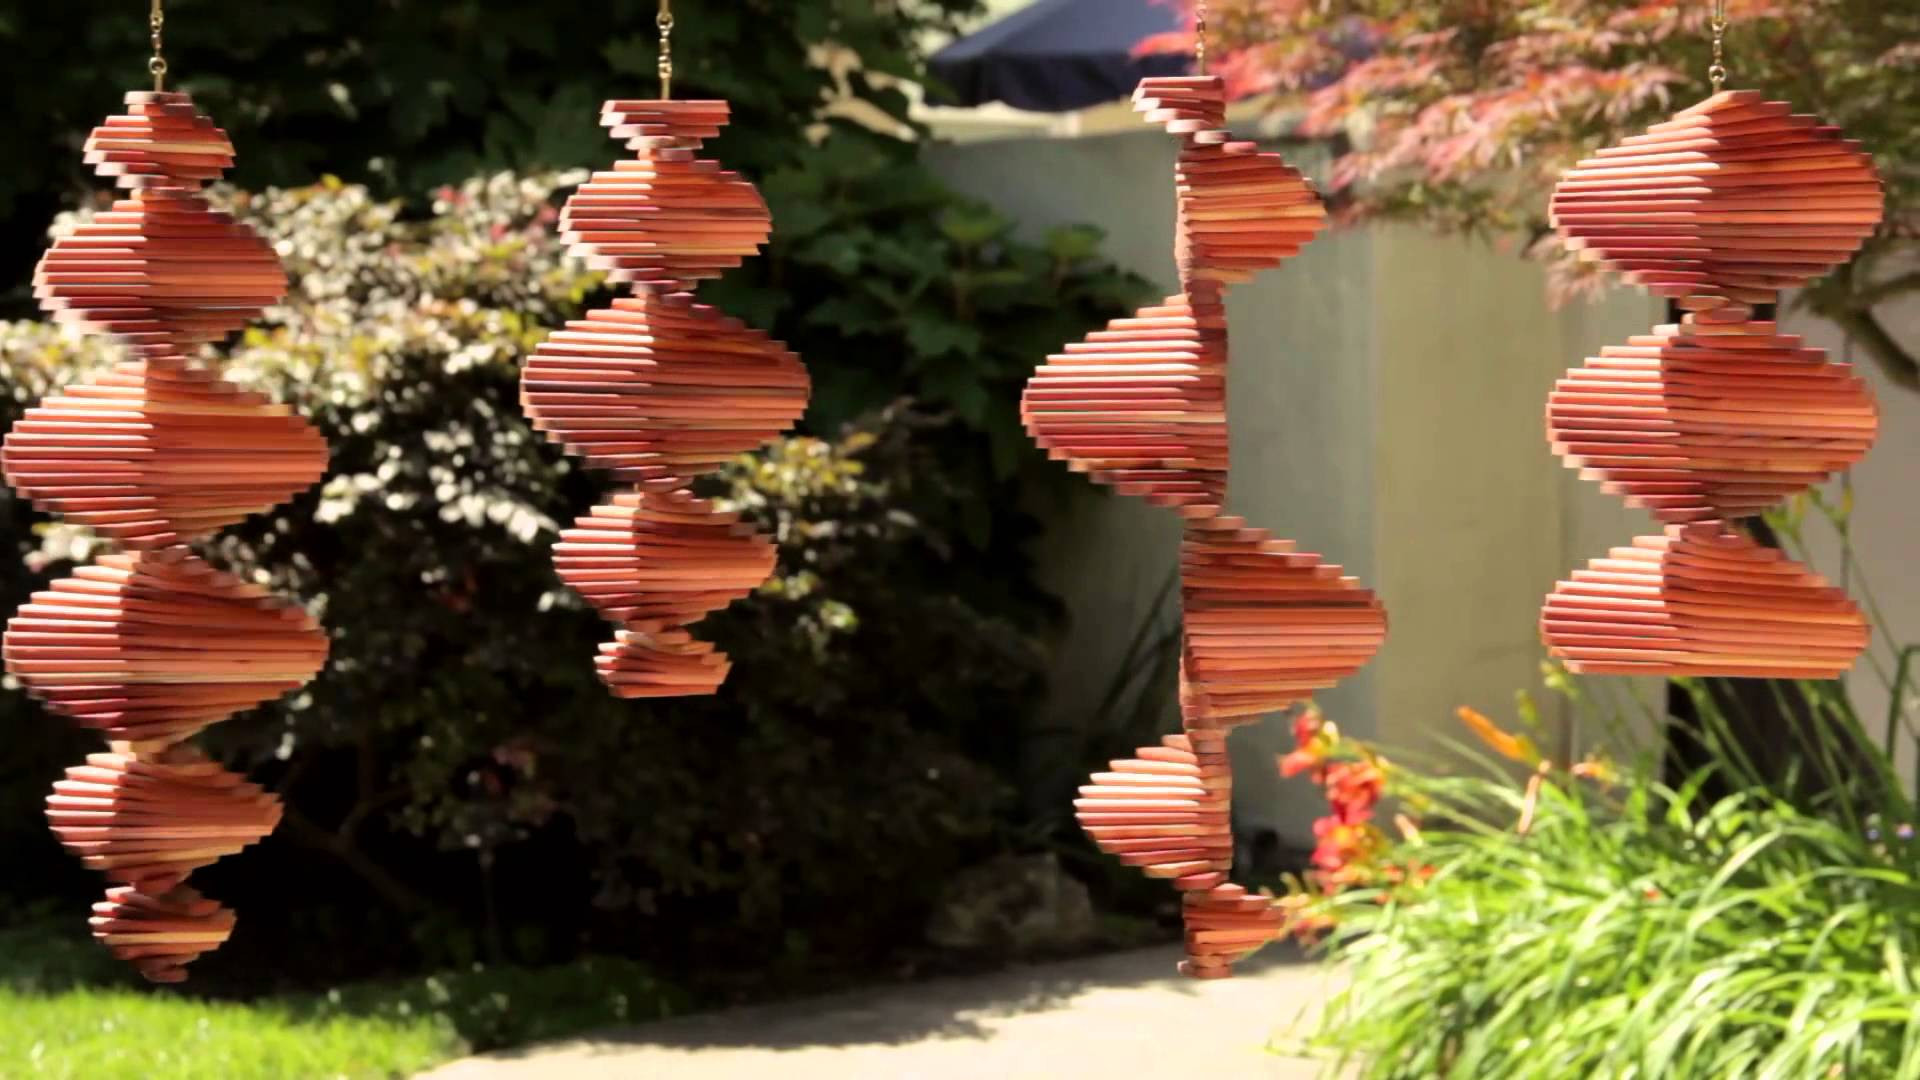 DIY Wooden Wind Spinner
 Decorating Wind Spinners For Inspiring Outdoor